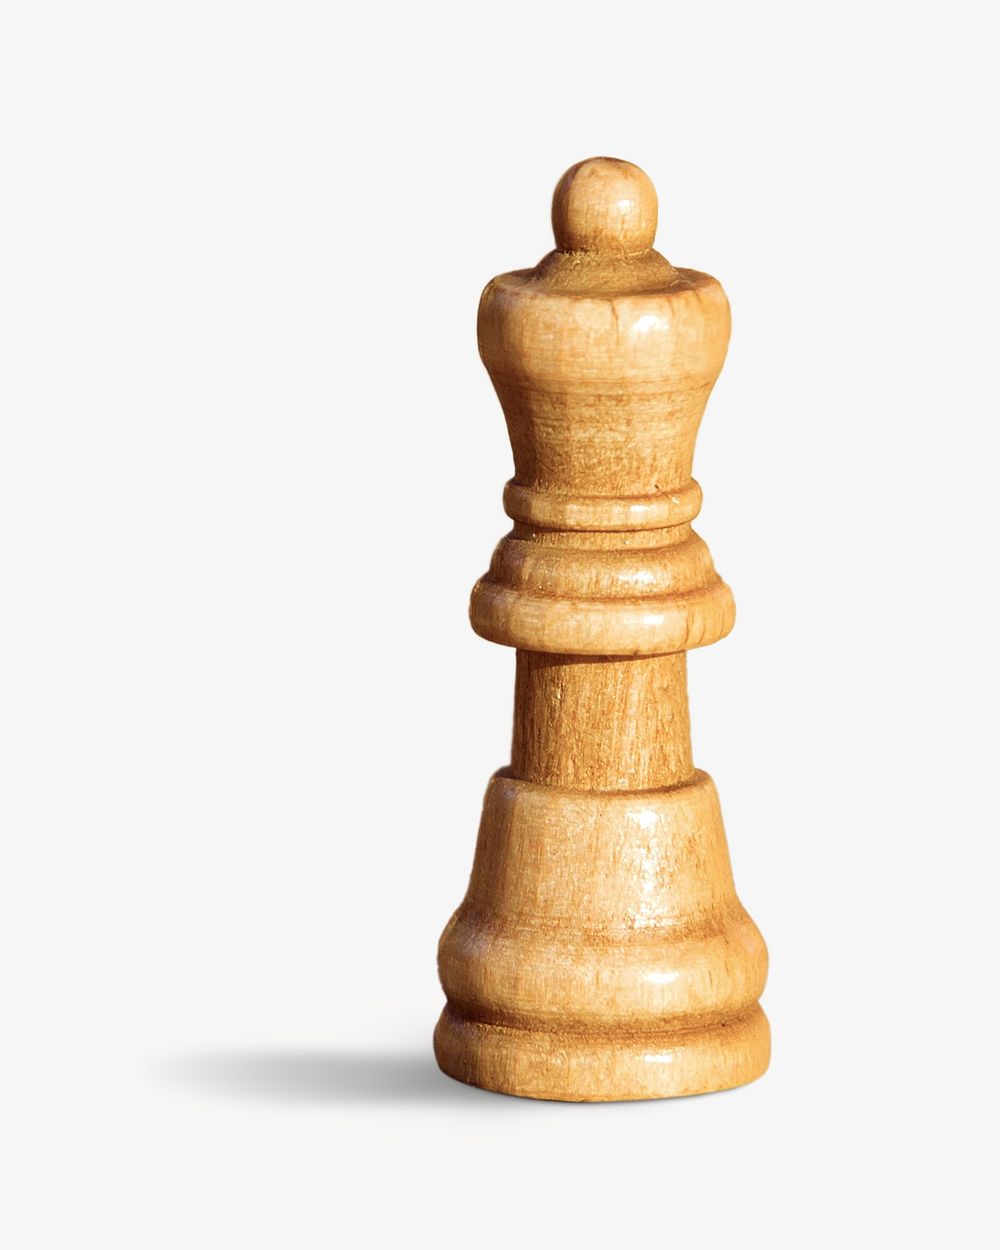 Pond chess piece, isolated image